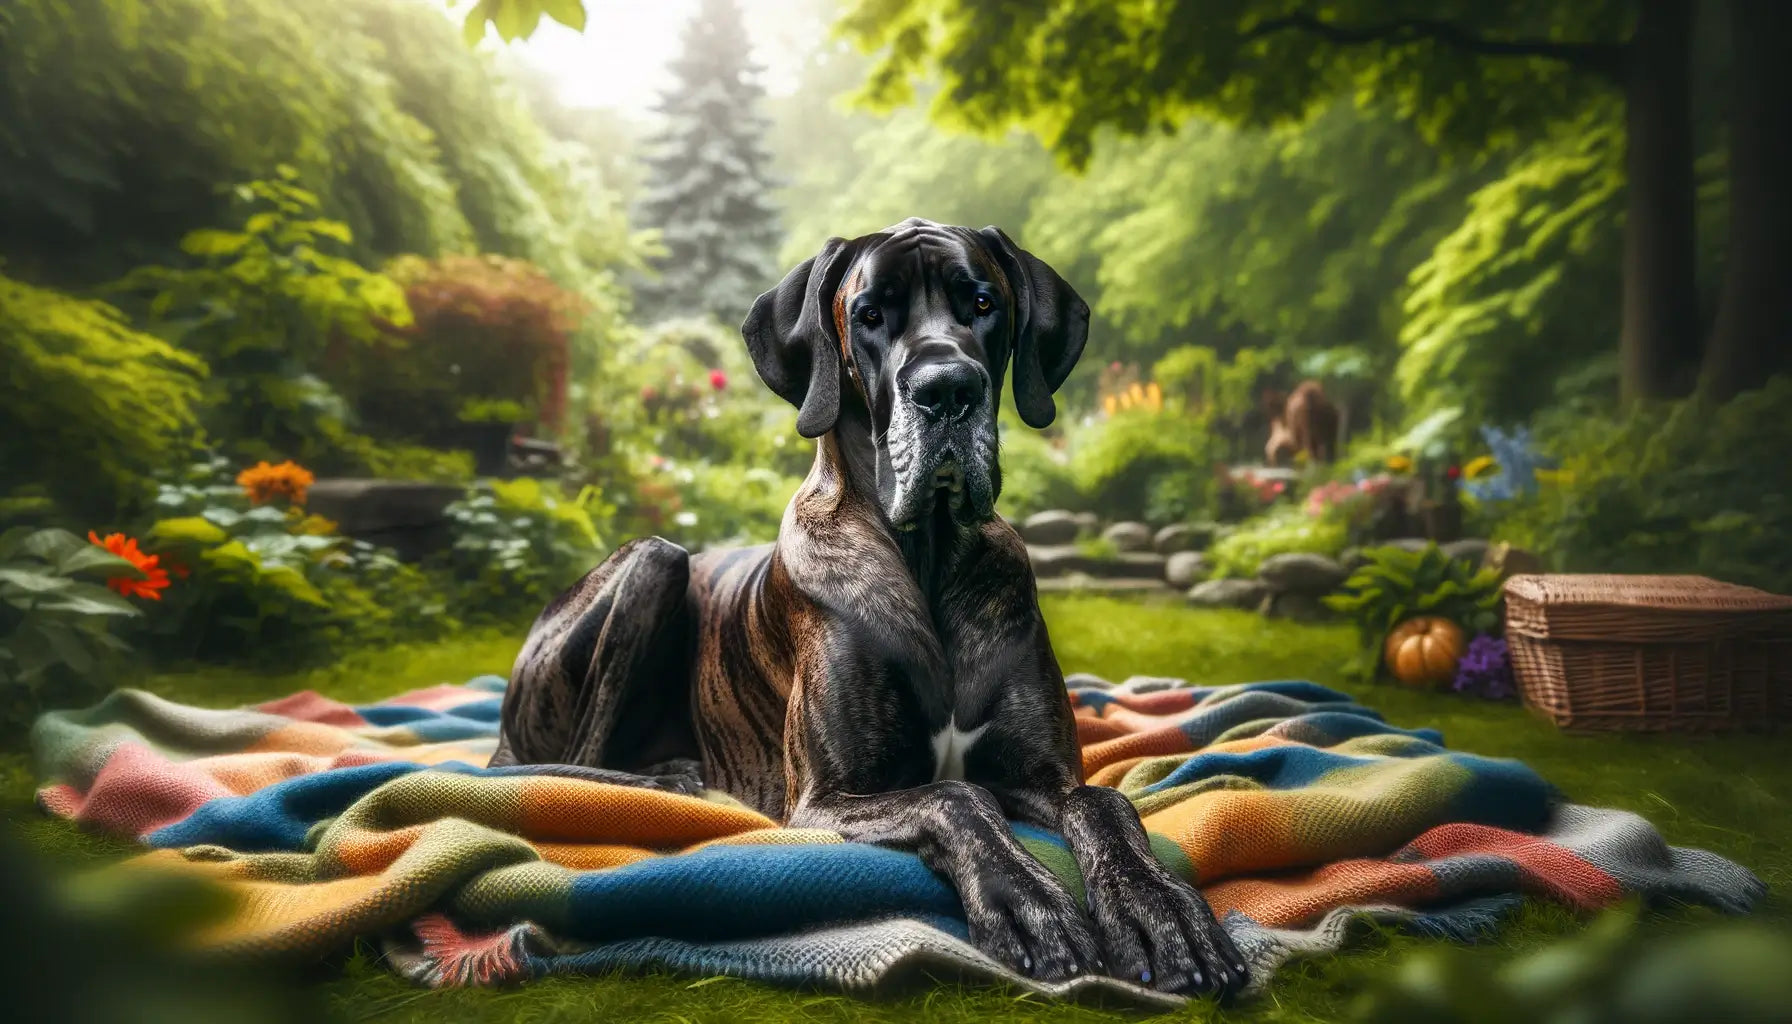 Brindle Great Dane on a blanket outdoors with natural greenery in the background.